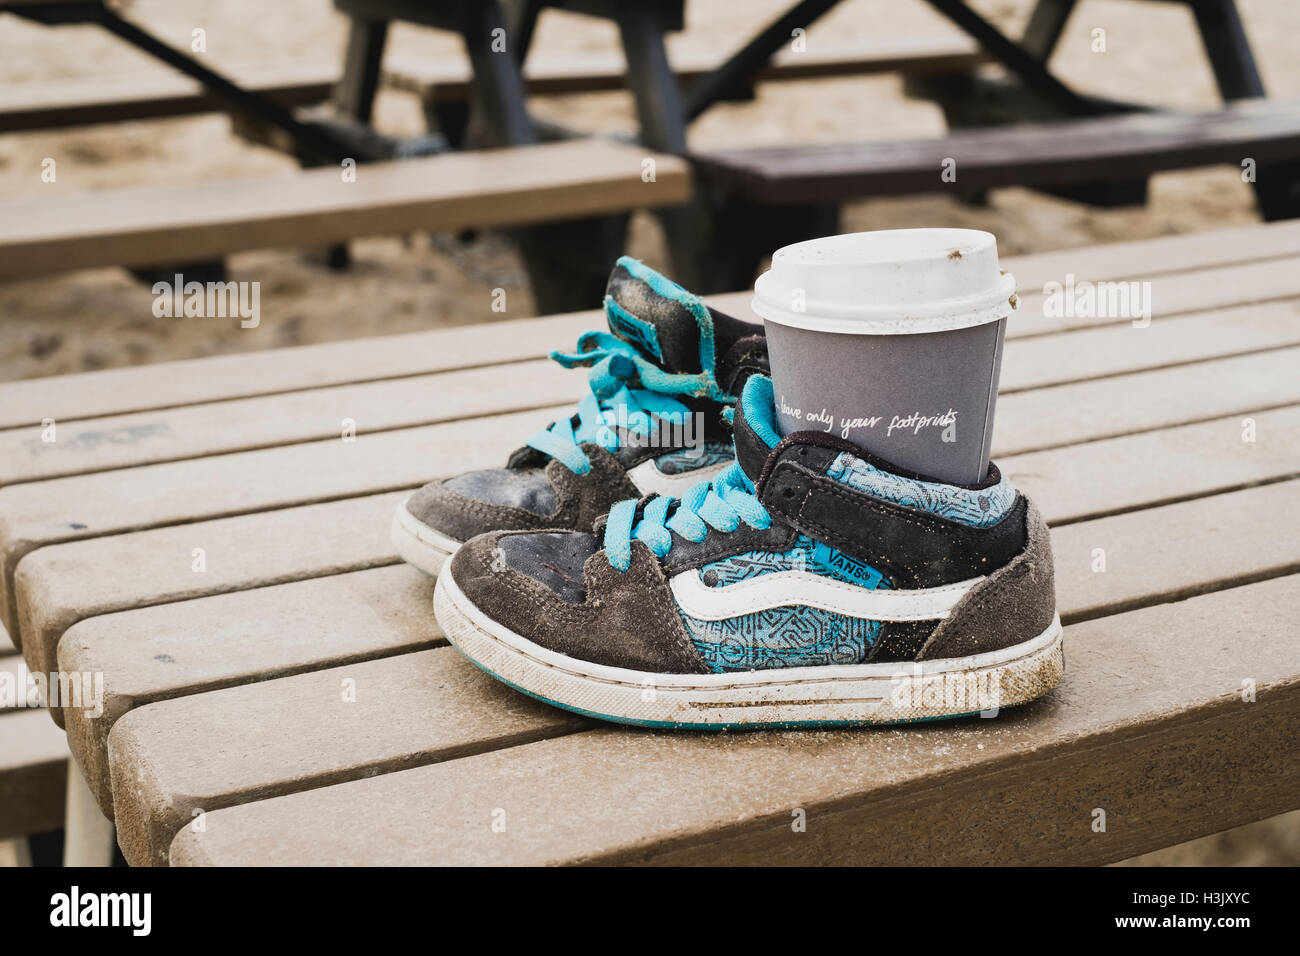 Ironic that a cup with 'leave only footprints' - an anti-litter message, is left discareded in a pair of childrens shoes. Stock Photo